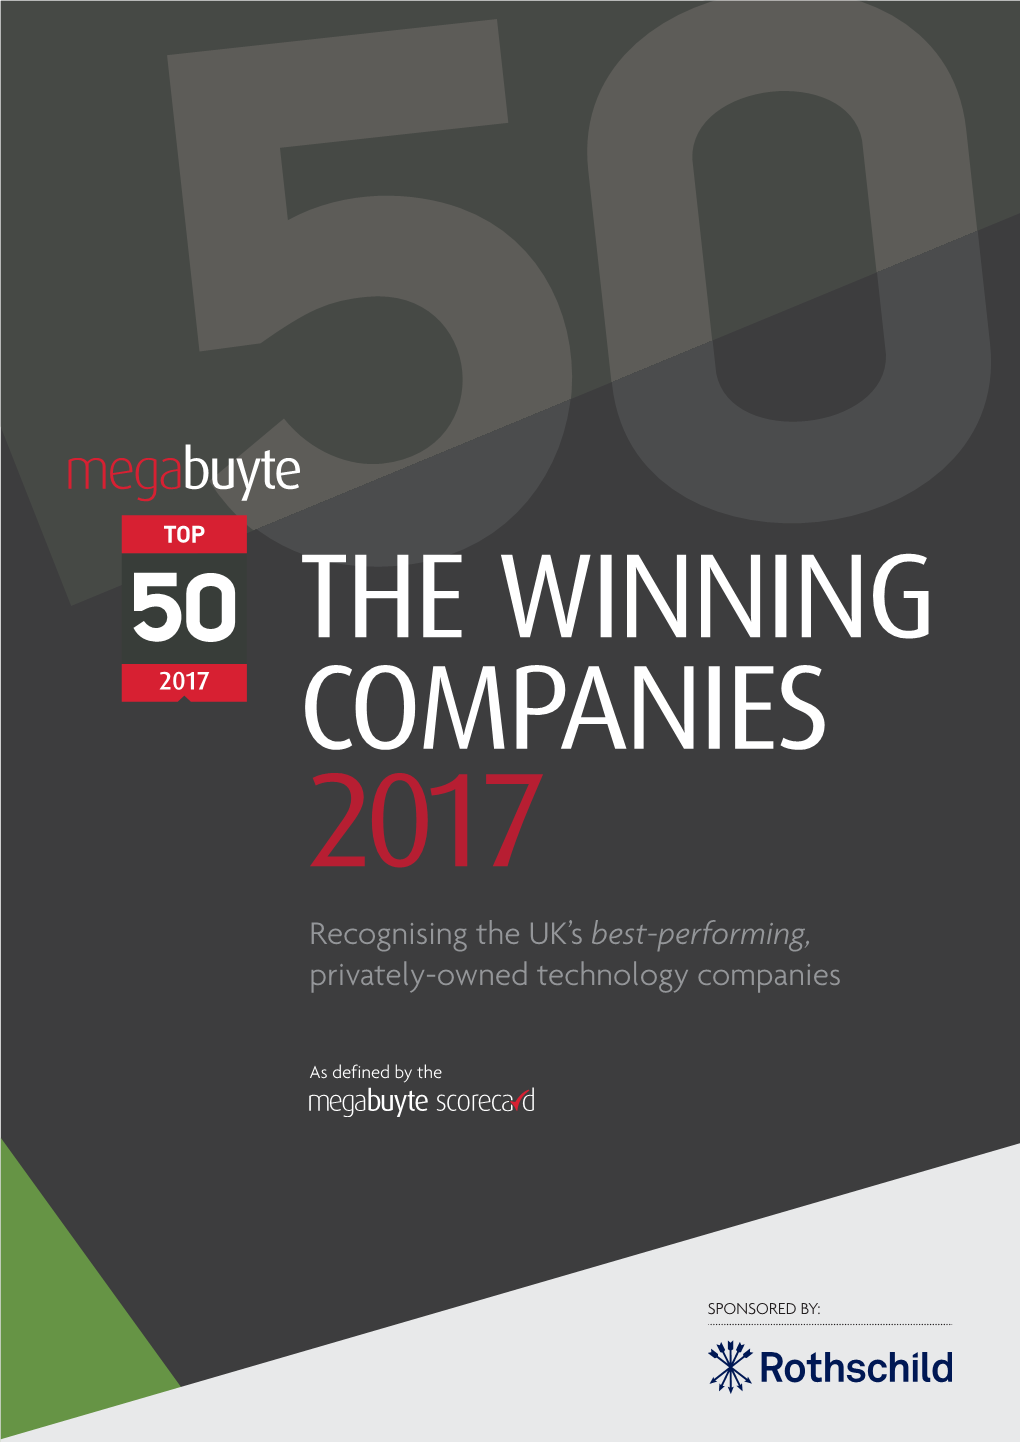 THE WINNING COMPANIES 2017 Recognising the UK’S Best-Performing, Privately-Owned Technology Companies